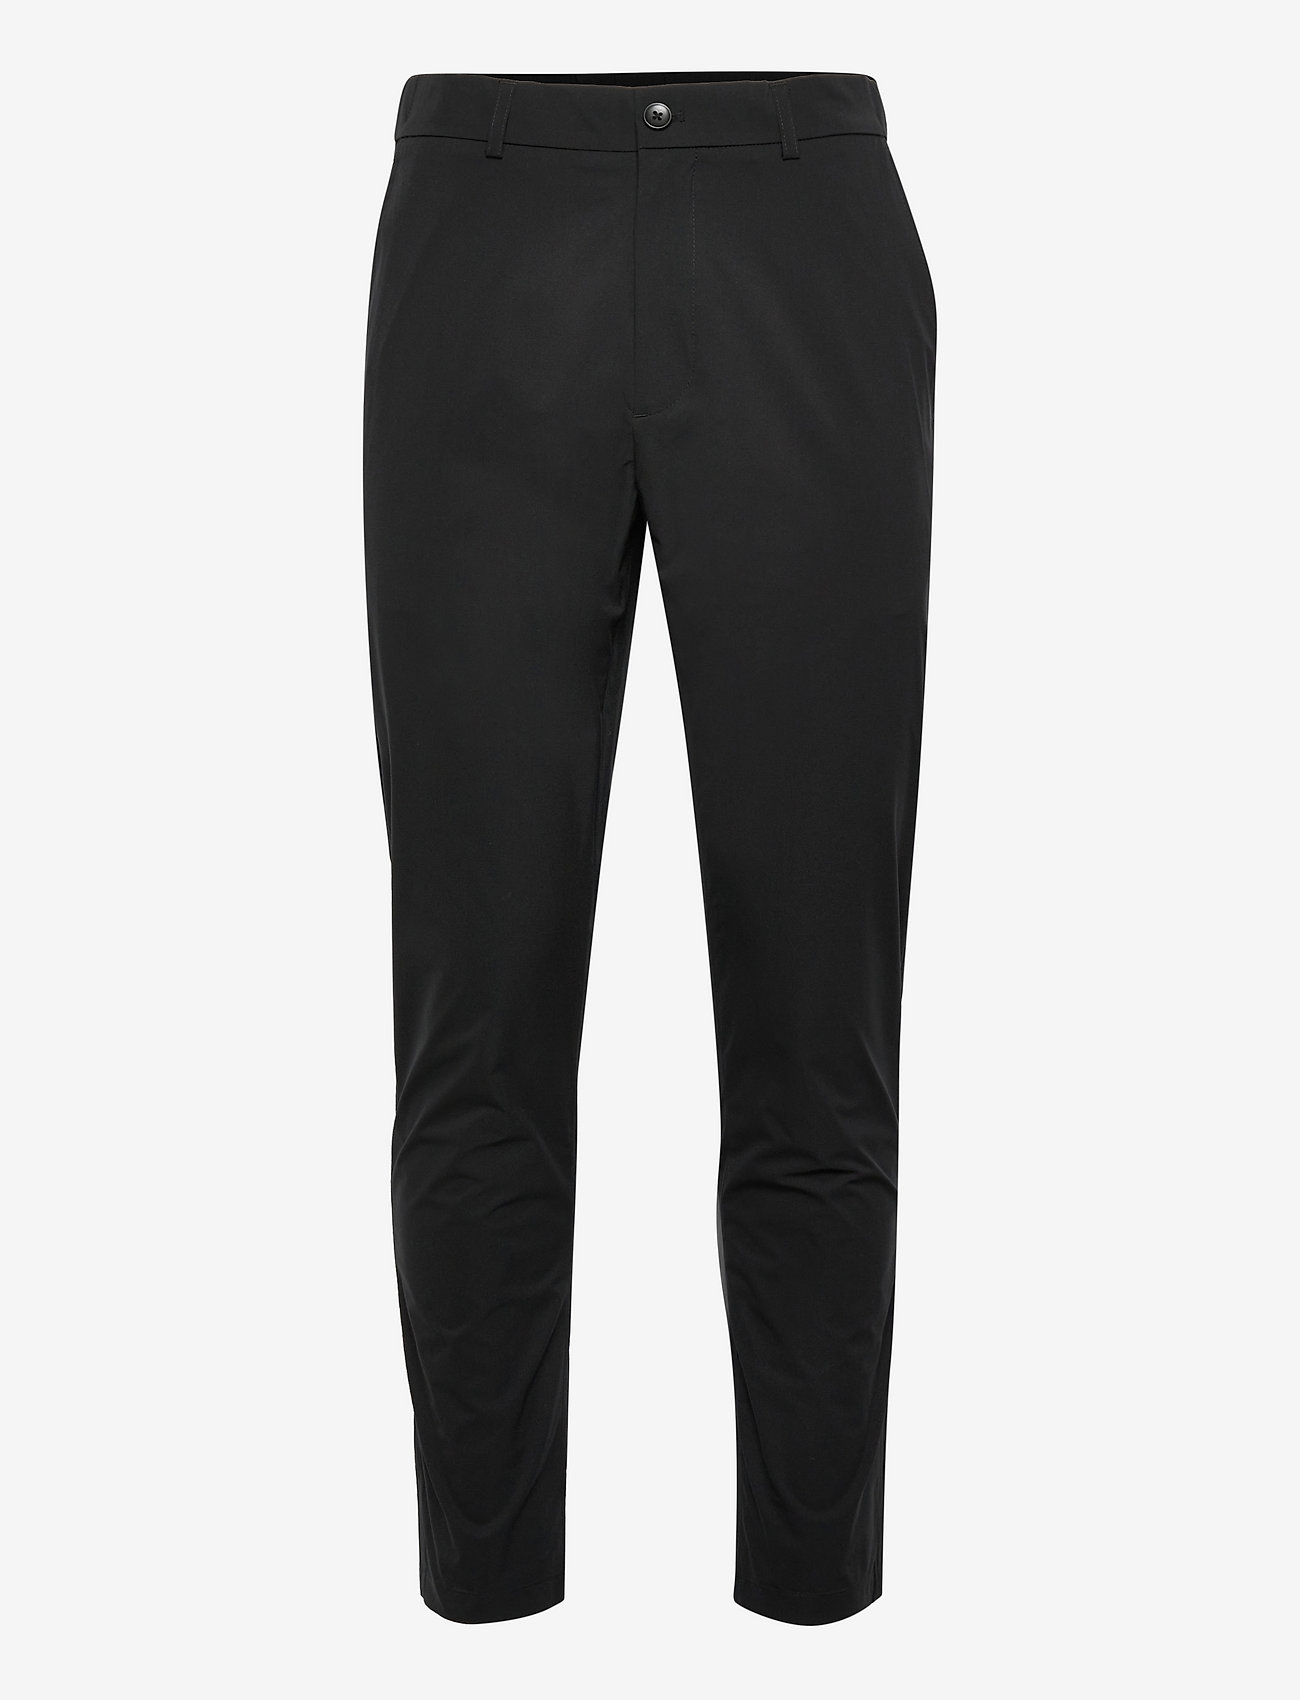 Esprit Collection - #ReimagineFlexibility: breathable trousers - chinosy - black - 0